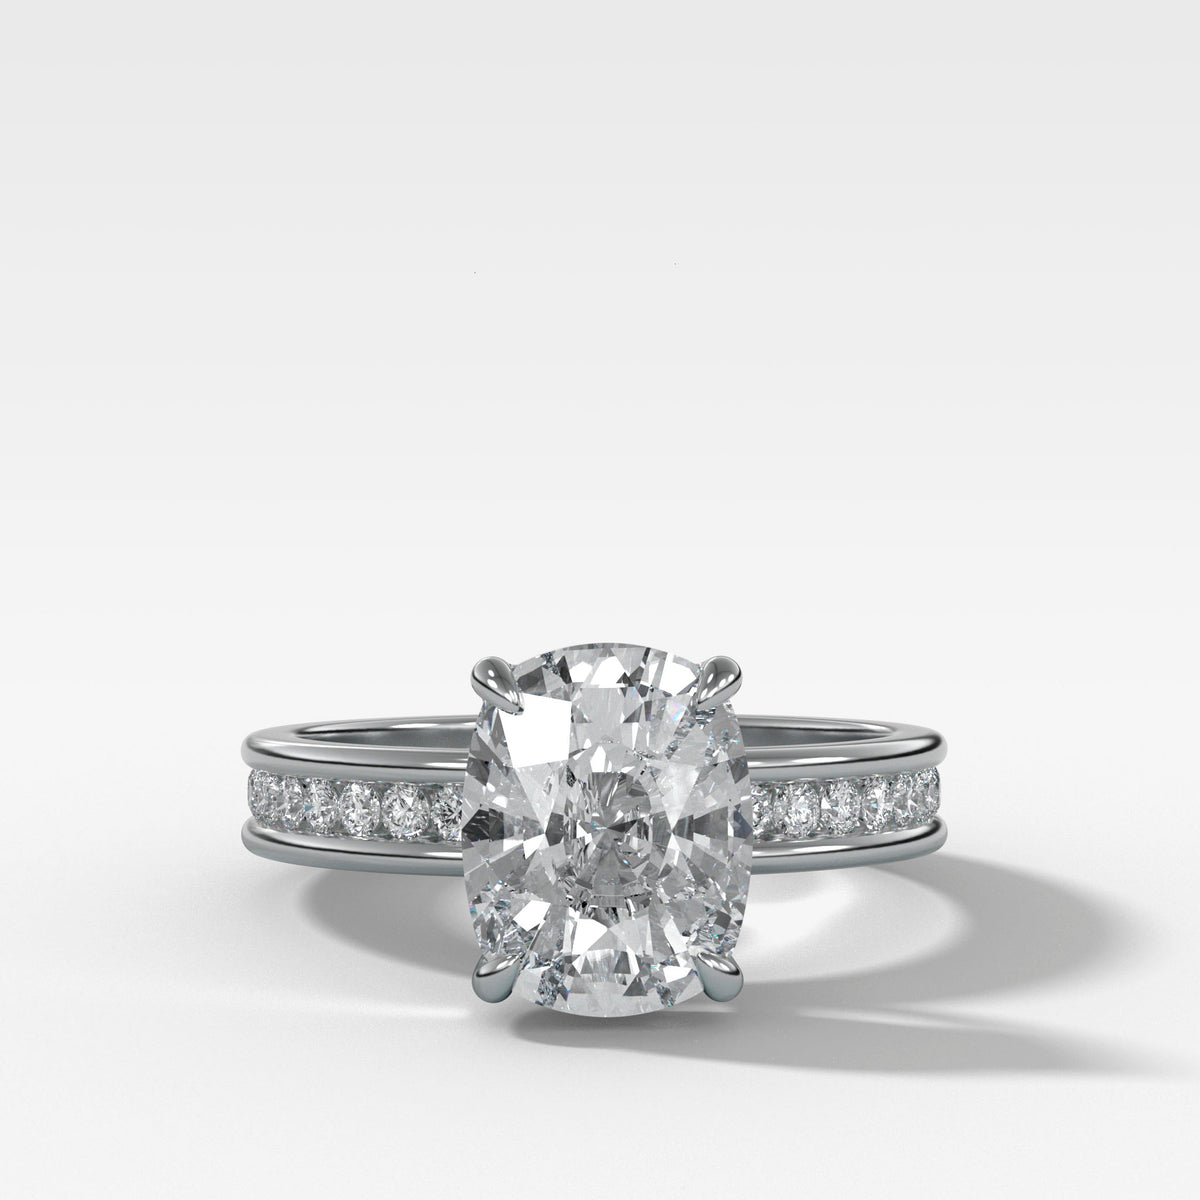 Petite Channel Set Engagement Ring with Elongated Cushion Cut Diamond